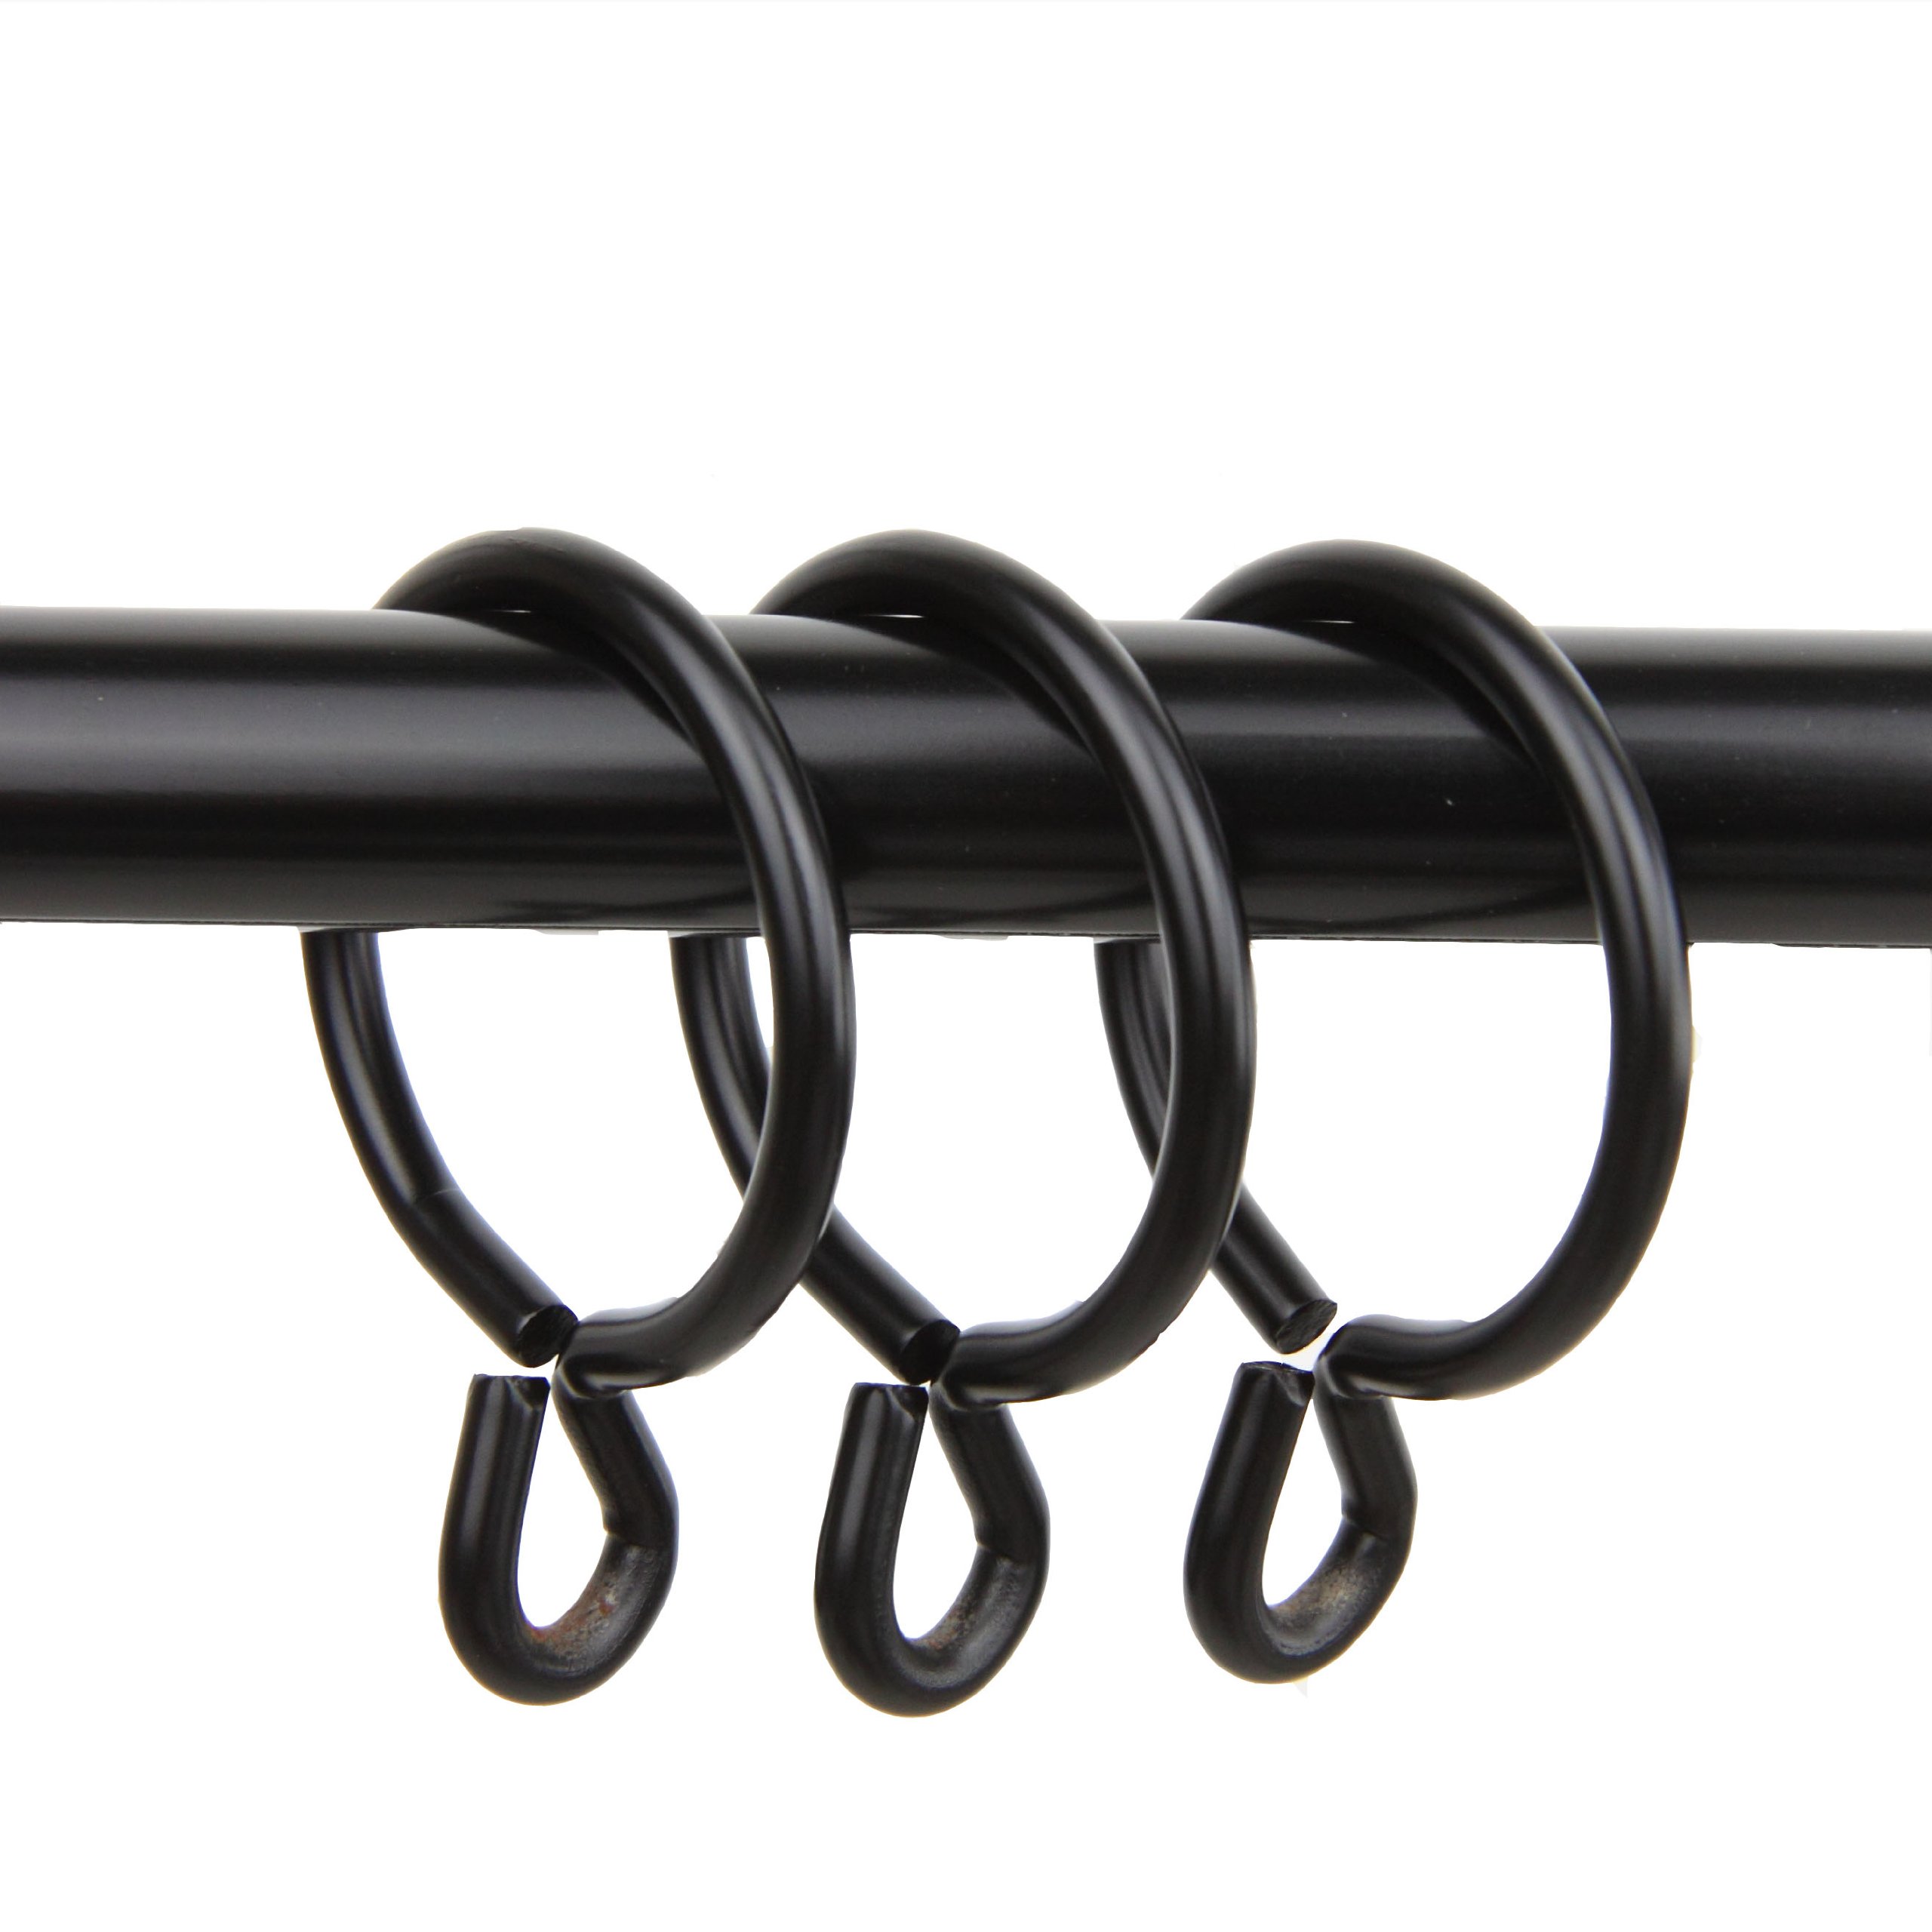 Book Cover Rod Desyne 10 Count Eyelet Curtain Rings, 1-3/8-Inch, Black